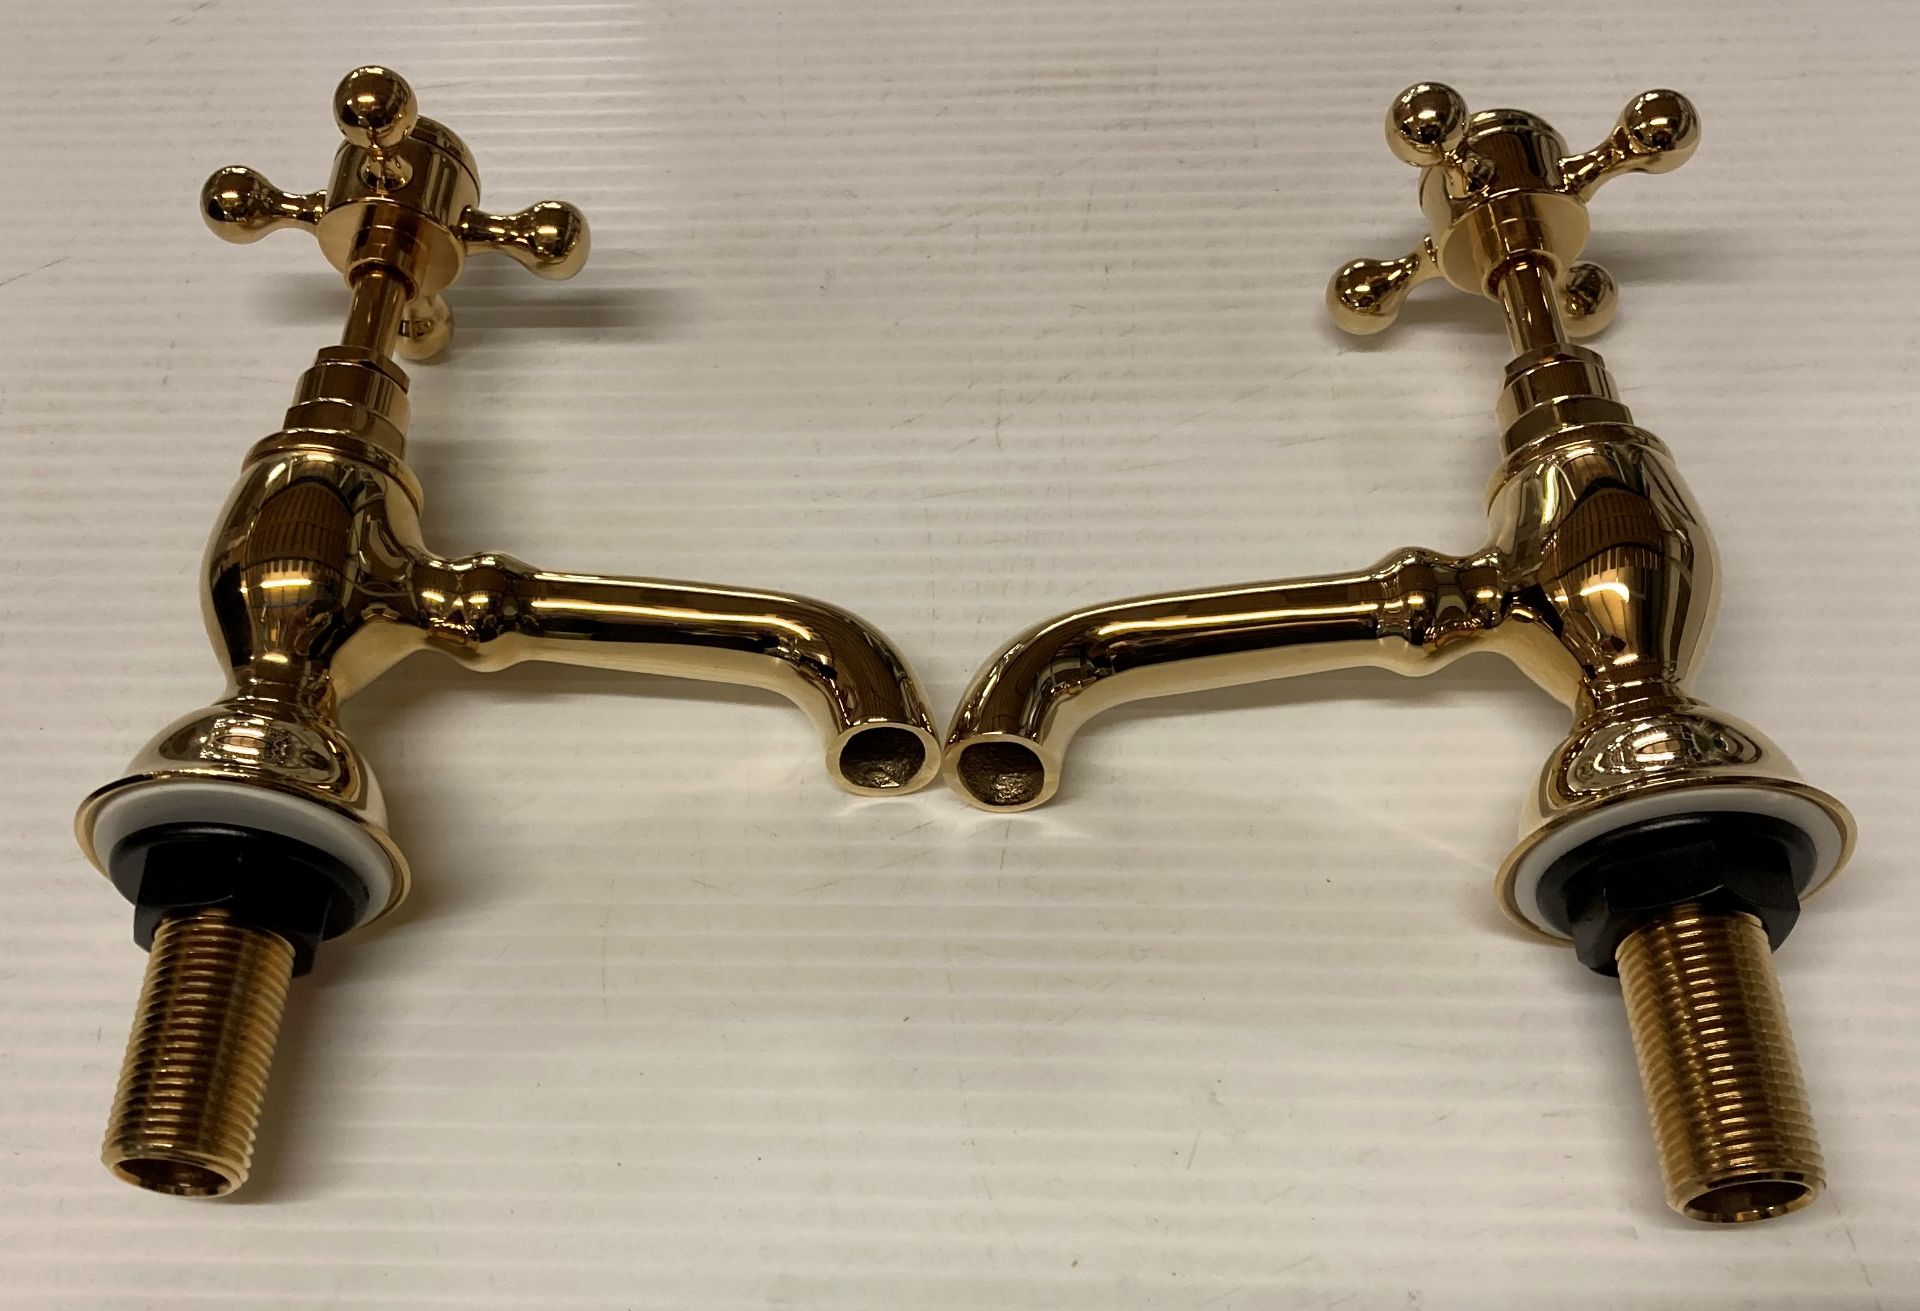 A pair of Imperial 1/2" basin taps in antique gold (saleroom location: R13)